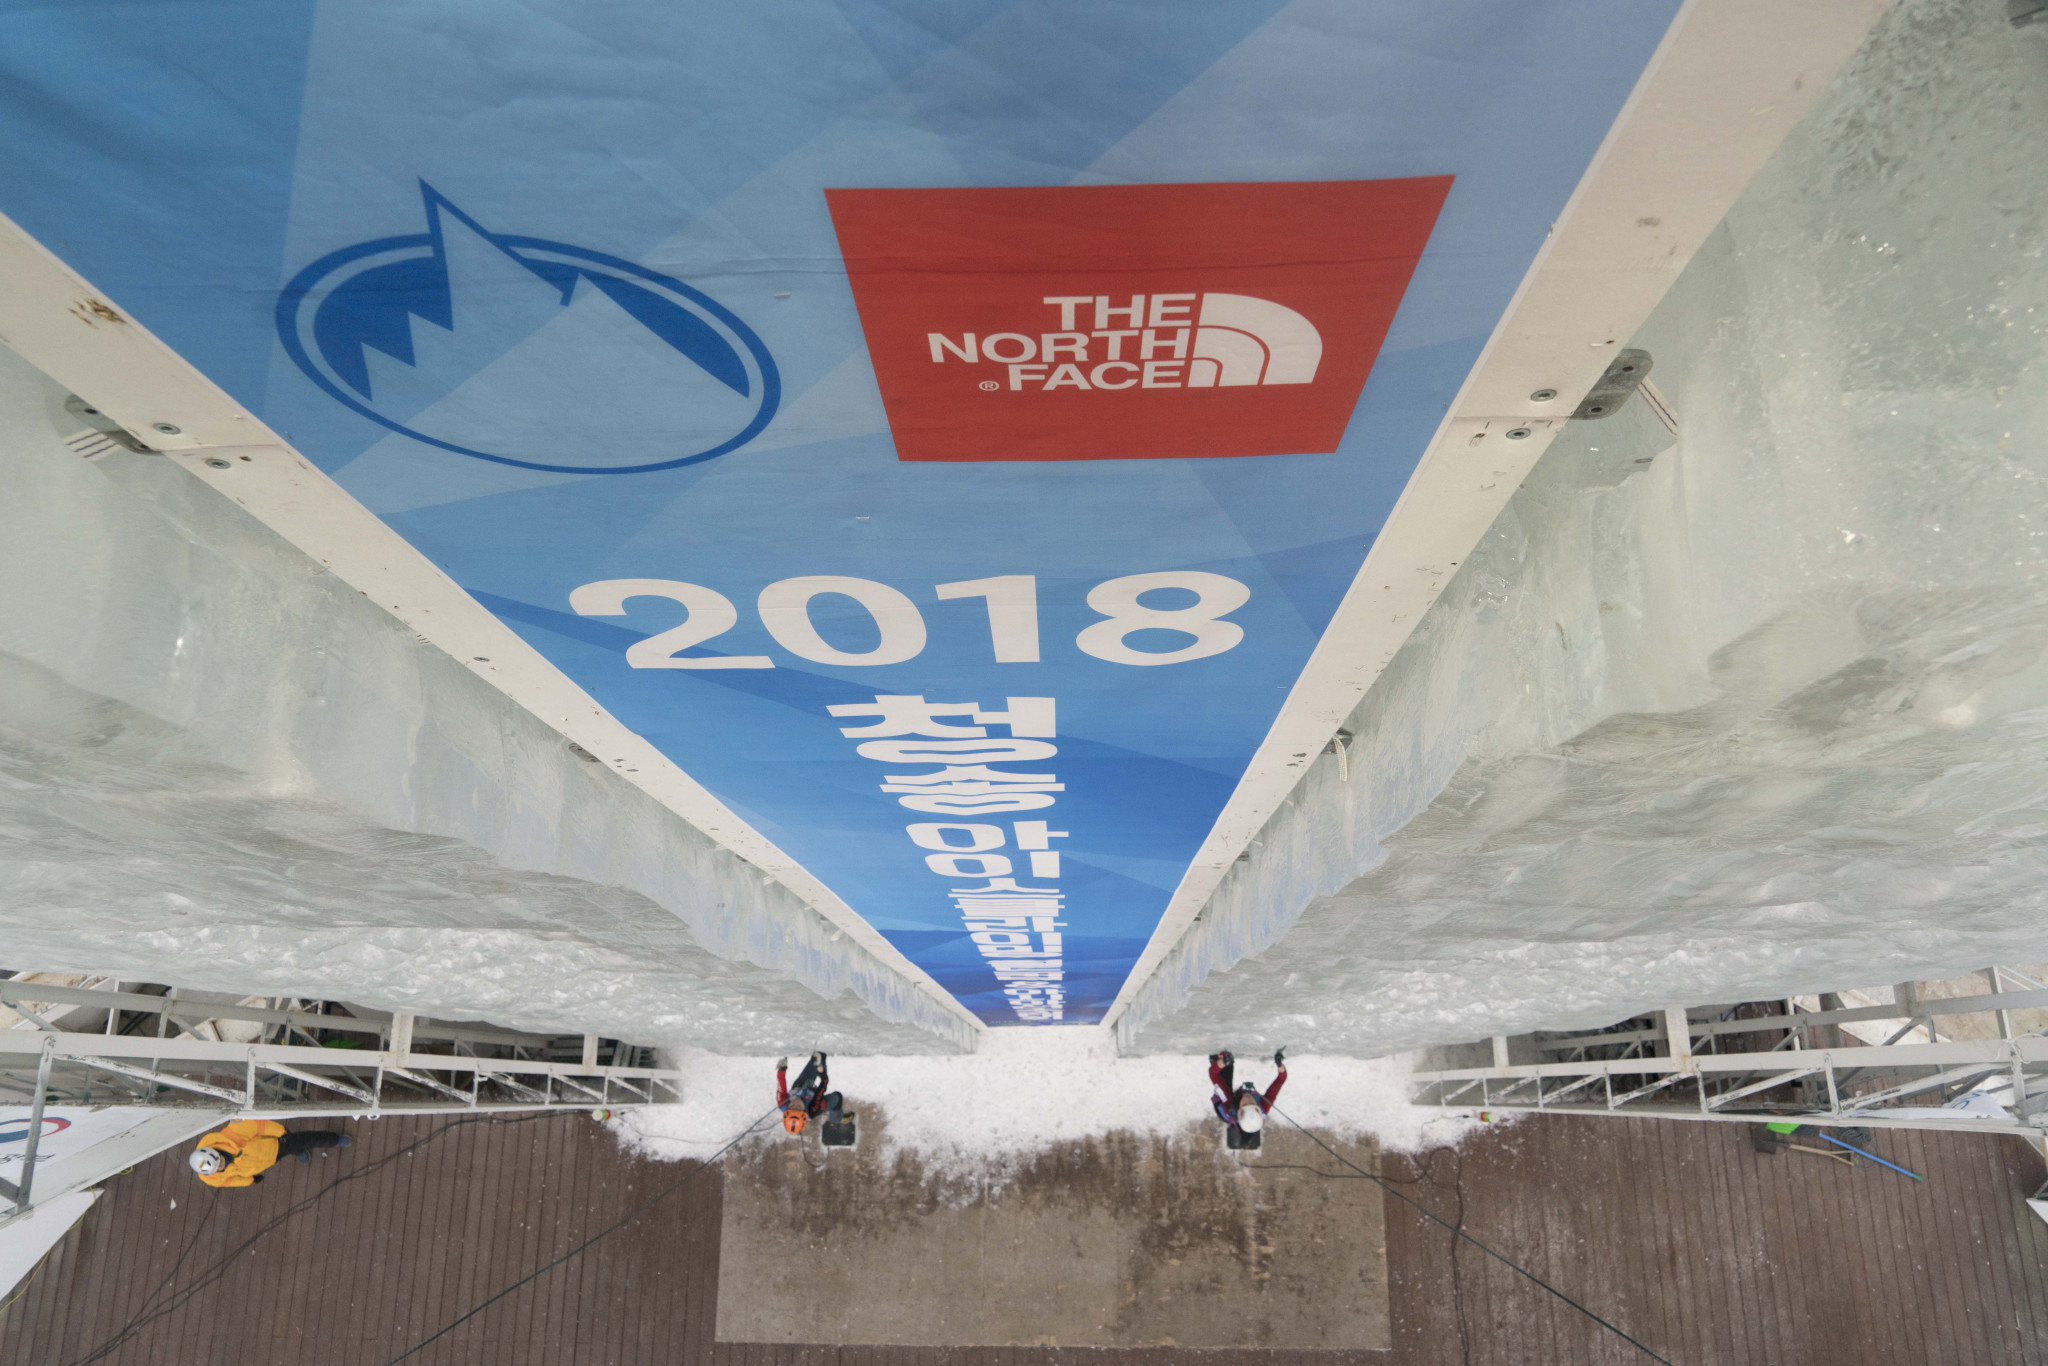 Russians dominate UIAA Ice Climbing World Cup in Cheongsong